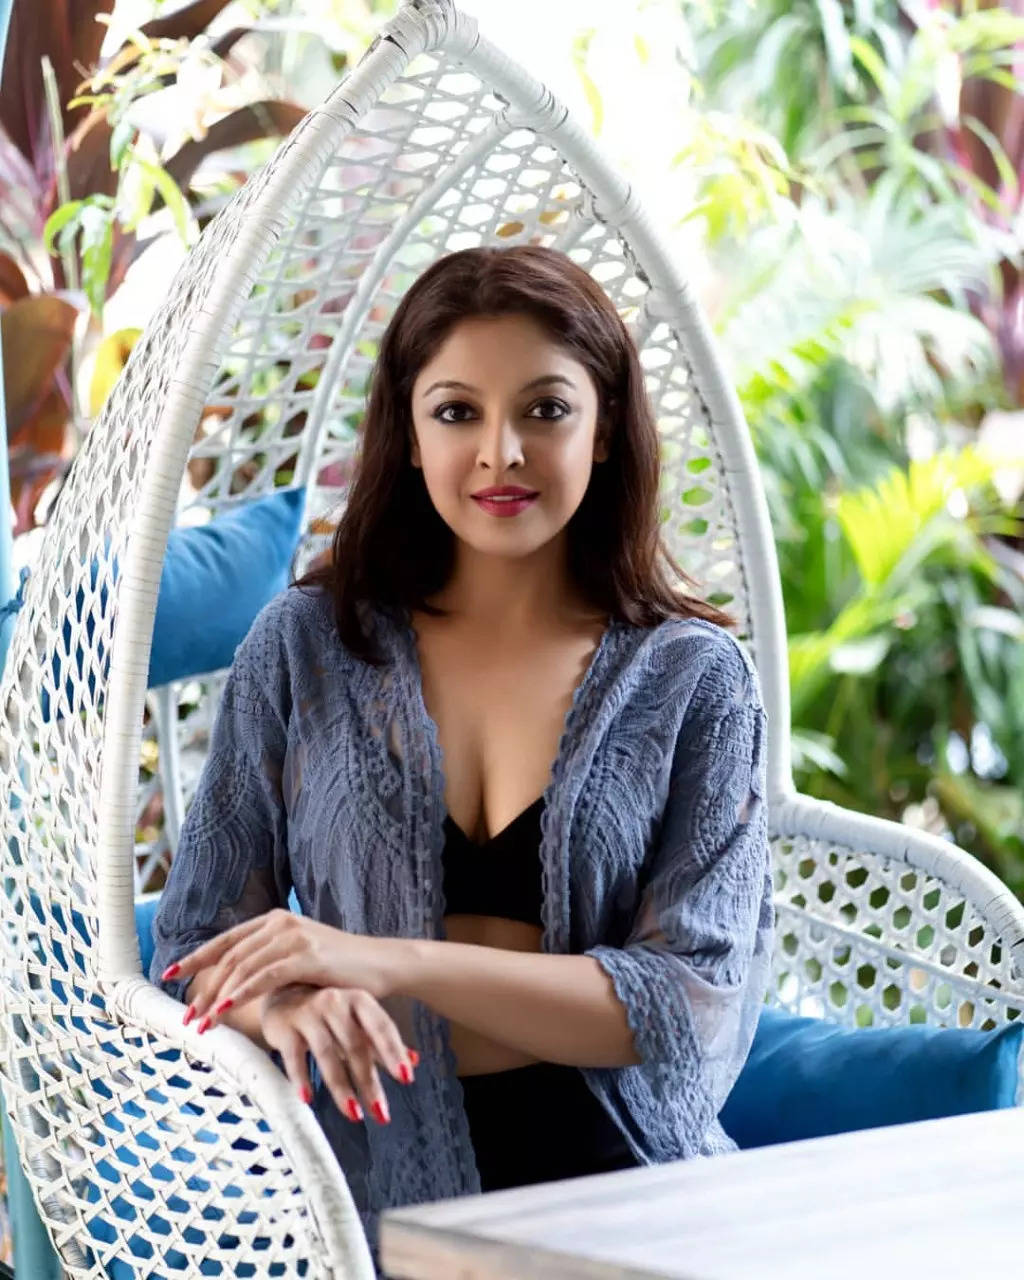 “It’s Bothering Me,” says Tanushree Dutta expressing discontent over her Wikipedia profile description